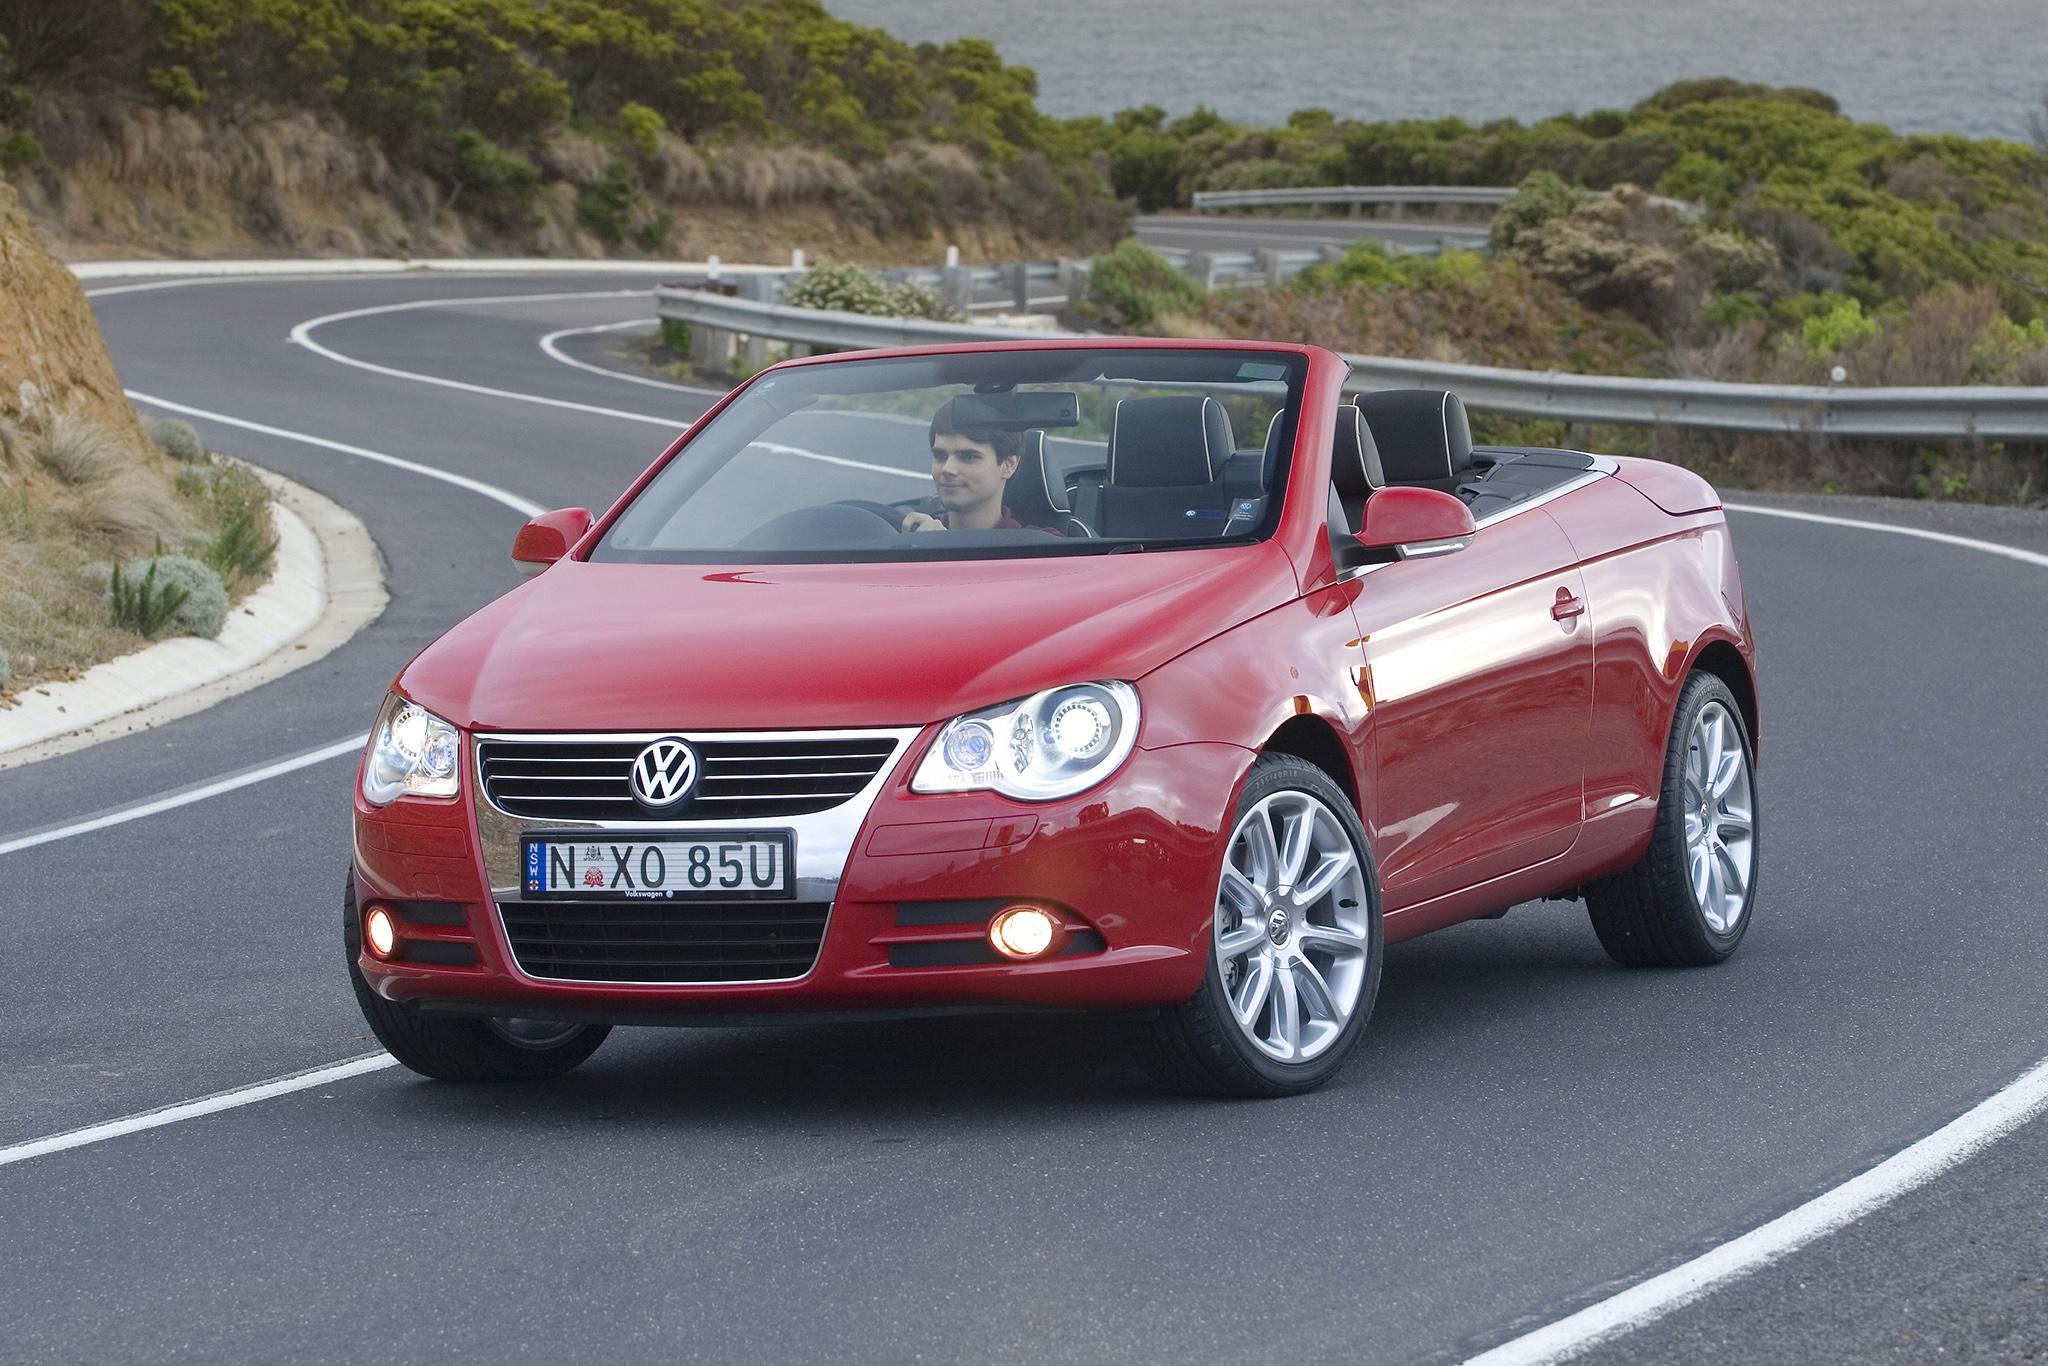 Volkswagen Eos axed from the UK